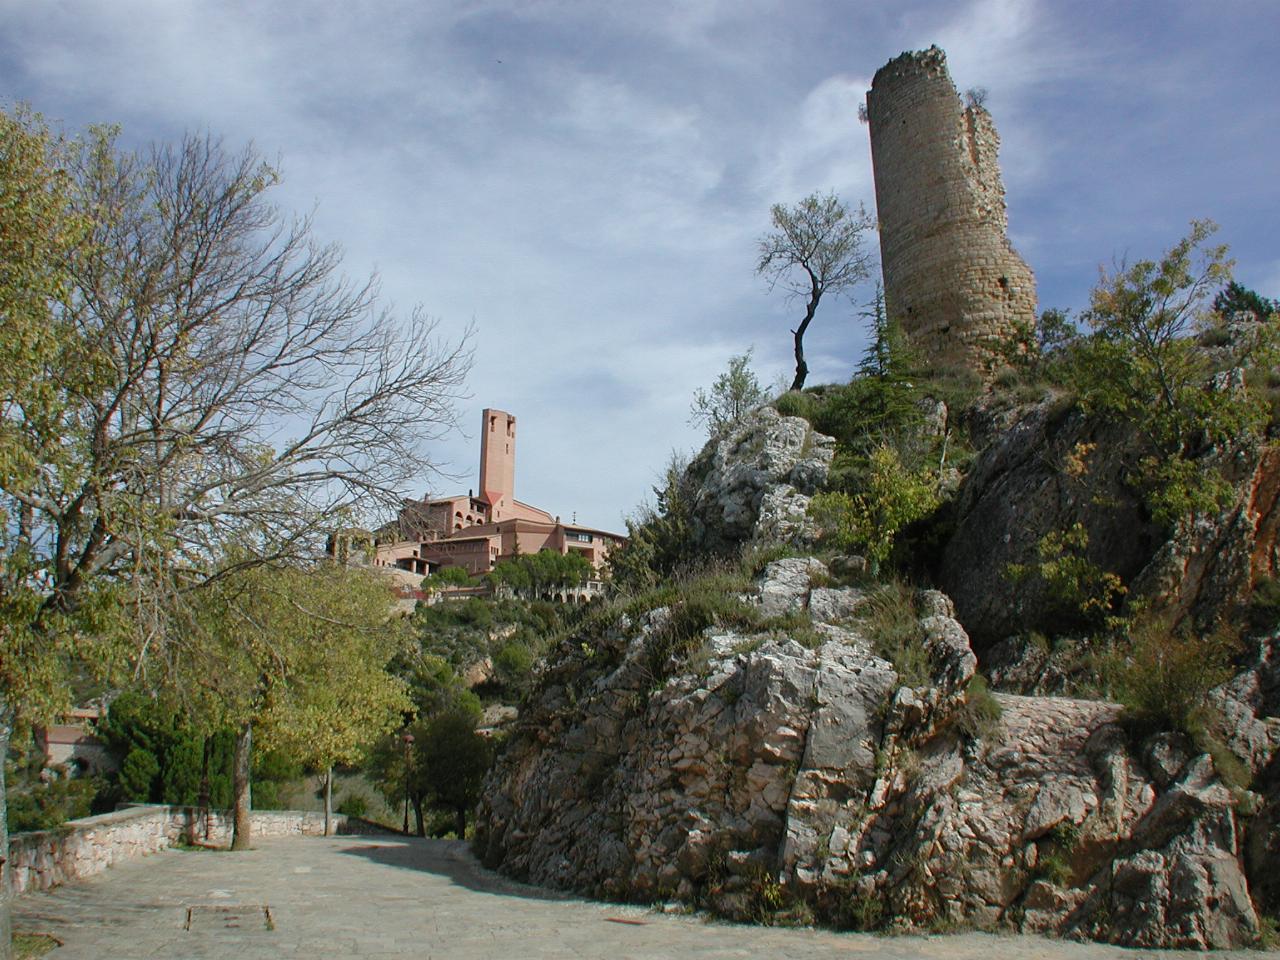 A tower which was part of an earlier shrine at Torreciudad